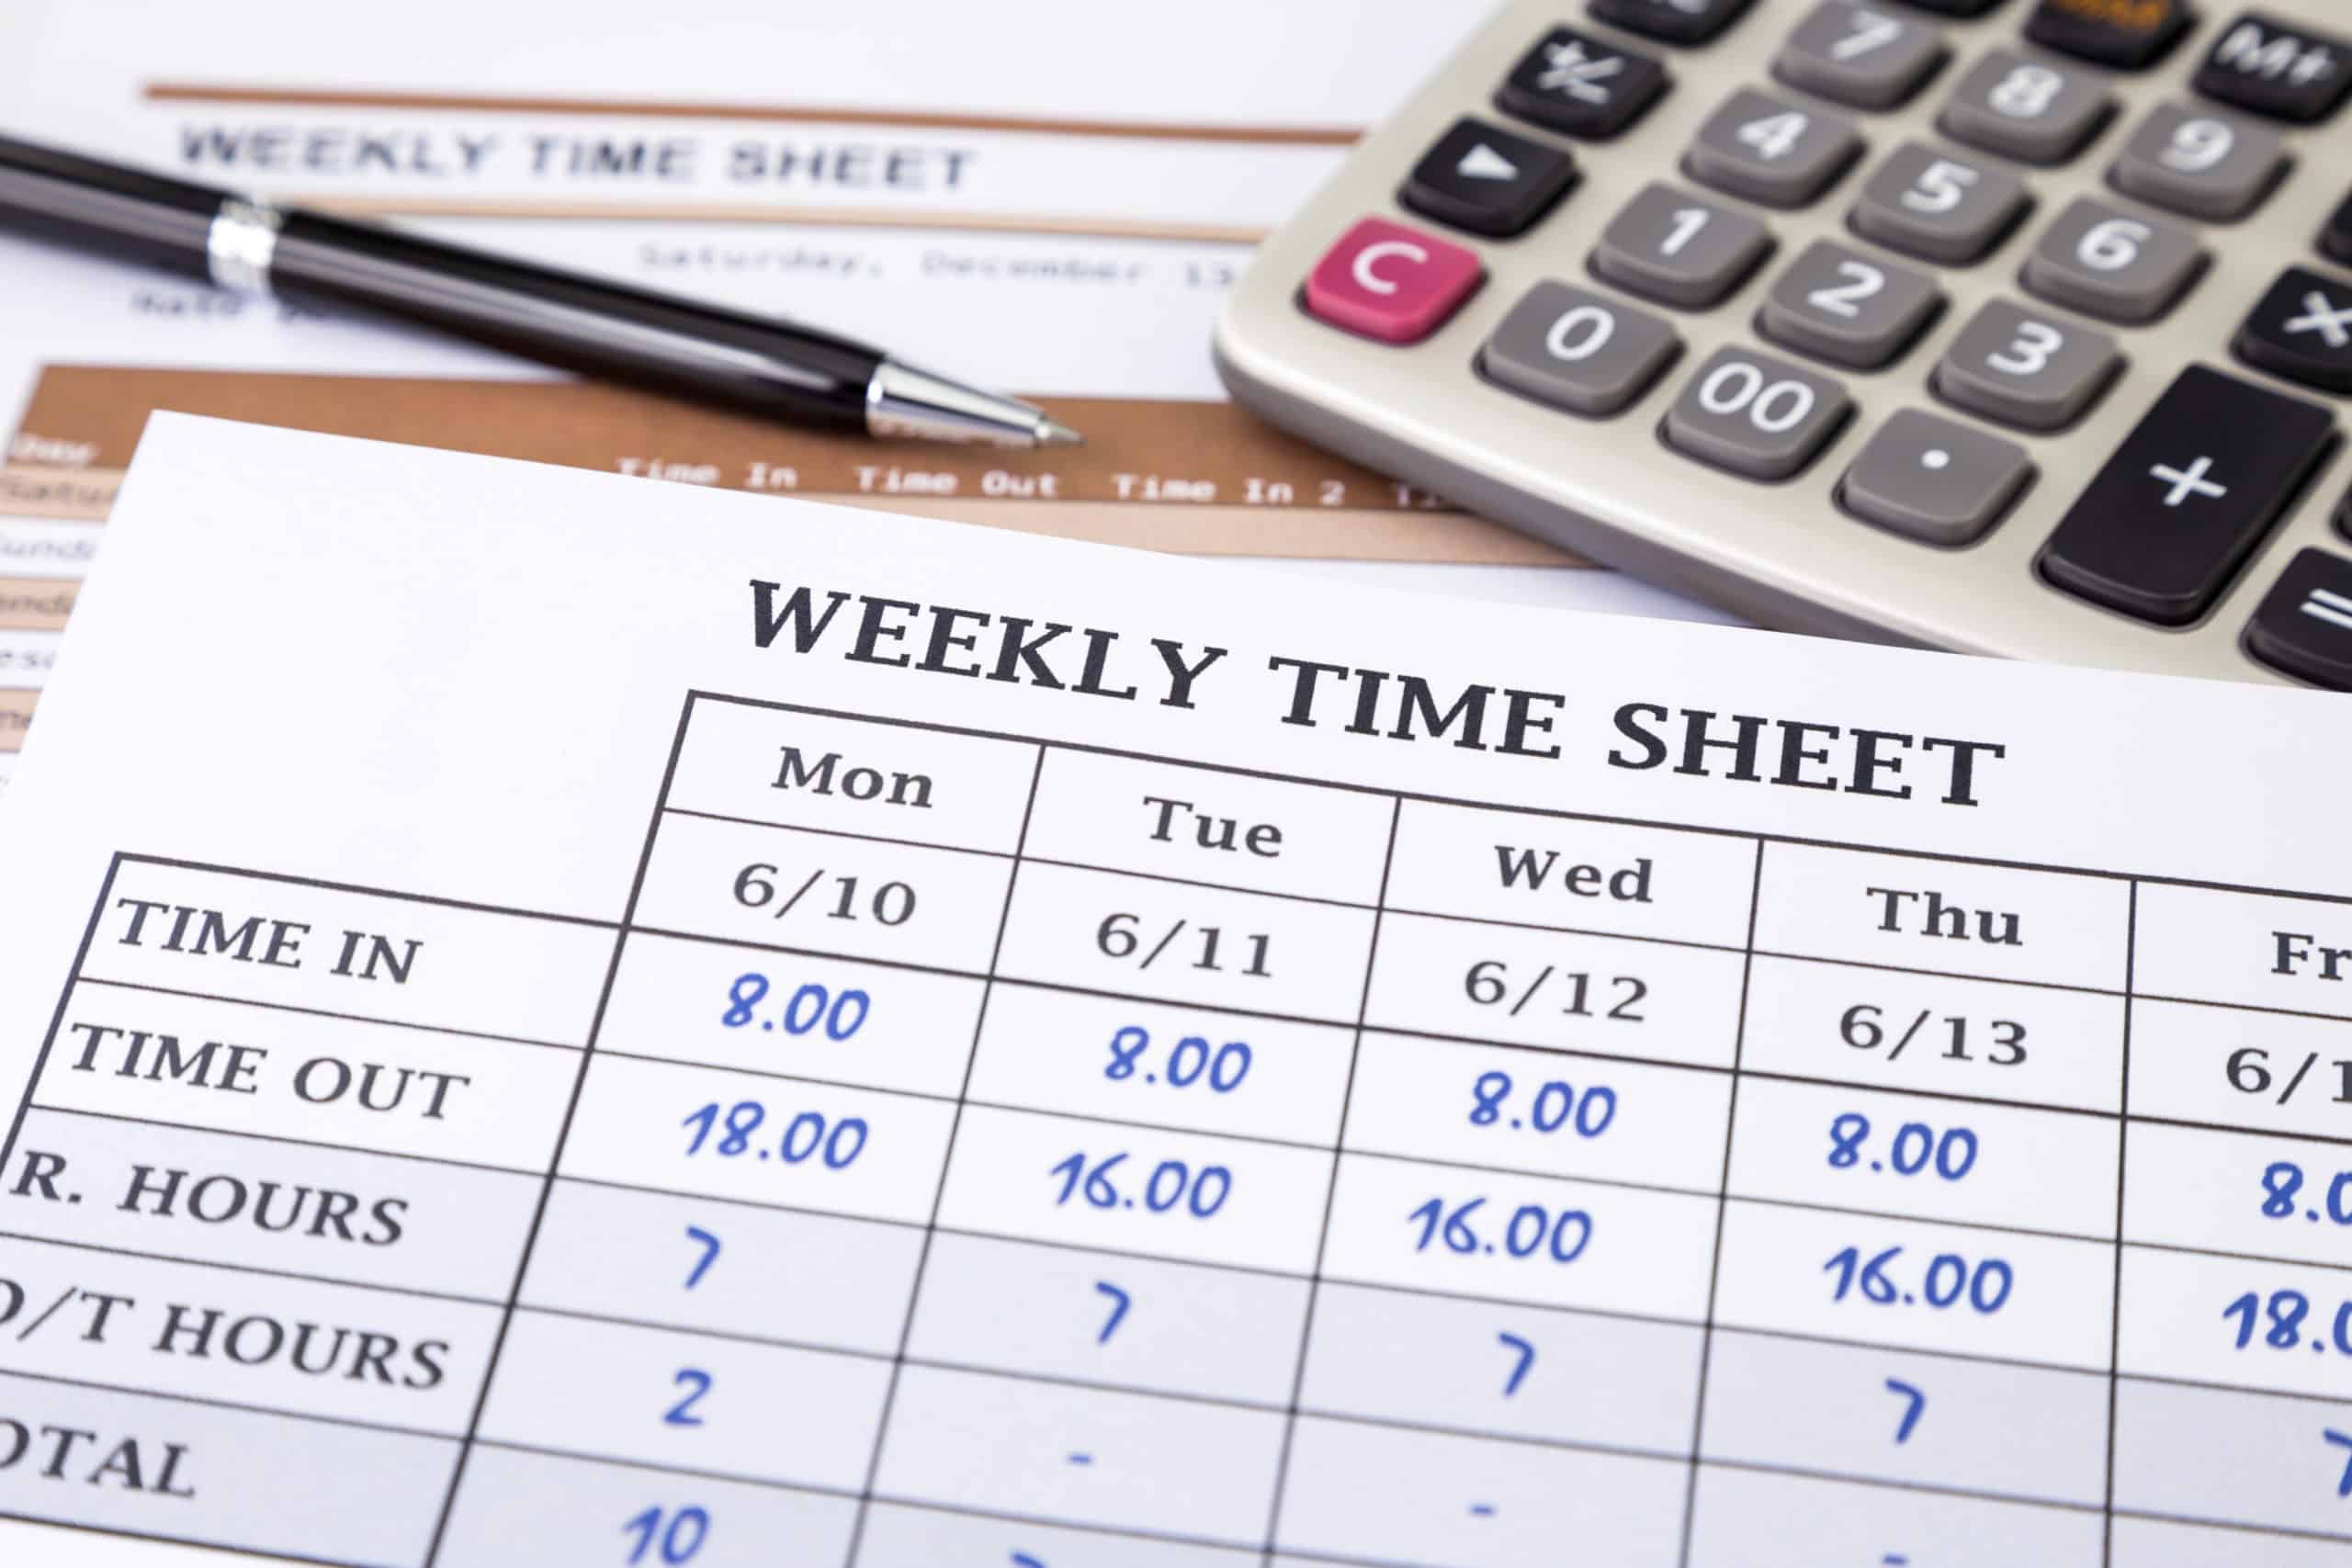 Weekly payroll time sheet used in paycheck calculations